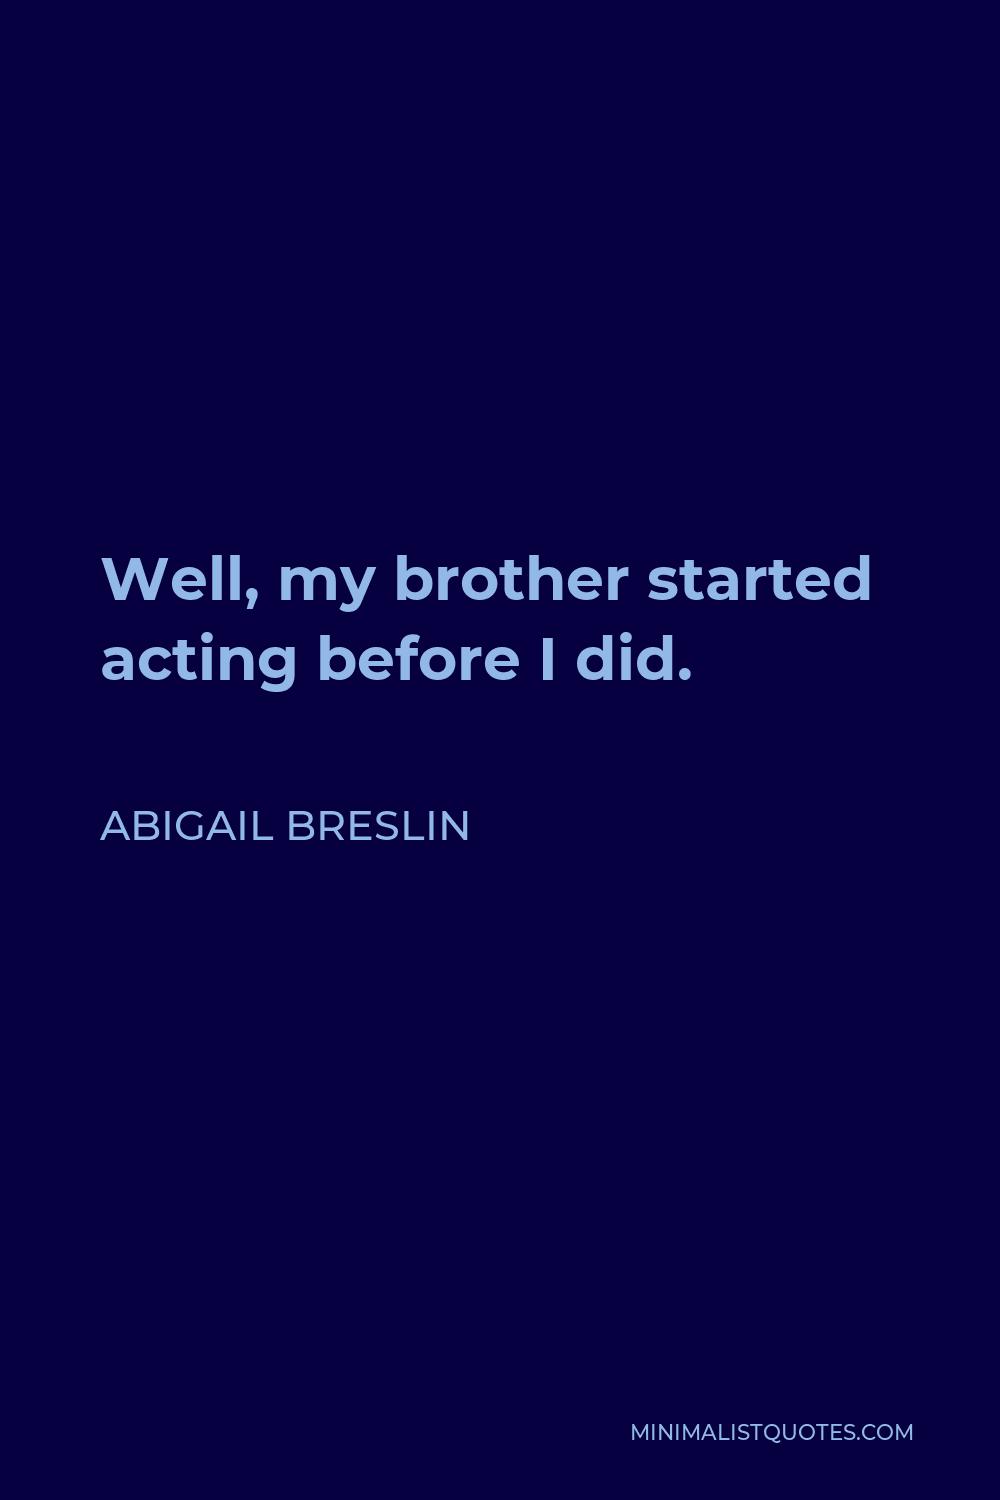 Abigail Breslin Quote - Well, my brother started acting before I did.